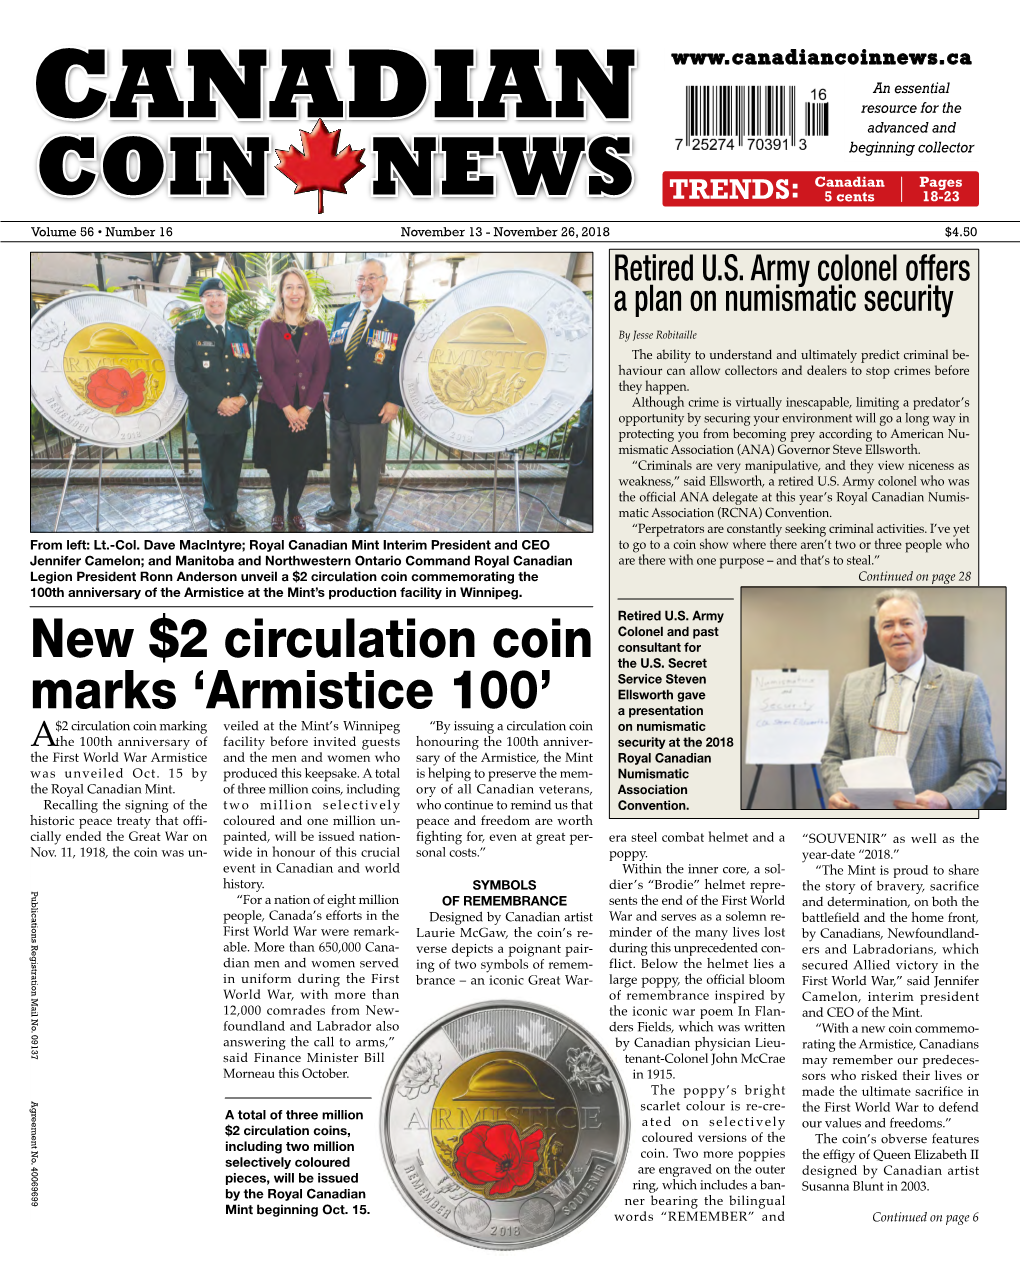 COLONIAL TOKENS Rency with Cutting-Edge Graphics and Similar to the Society’S Canada 150 Numismatics